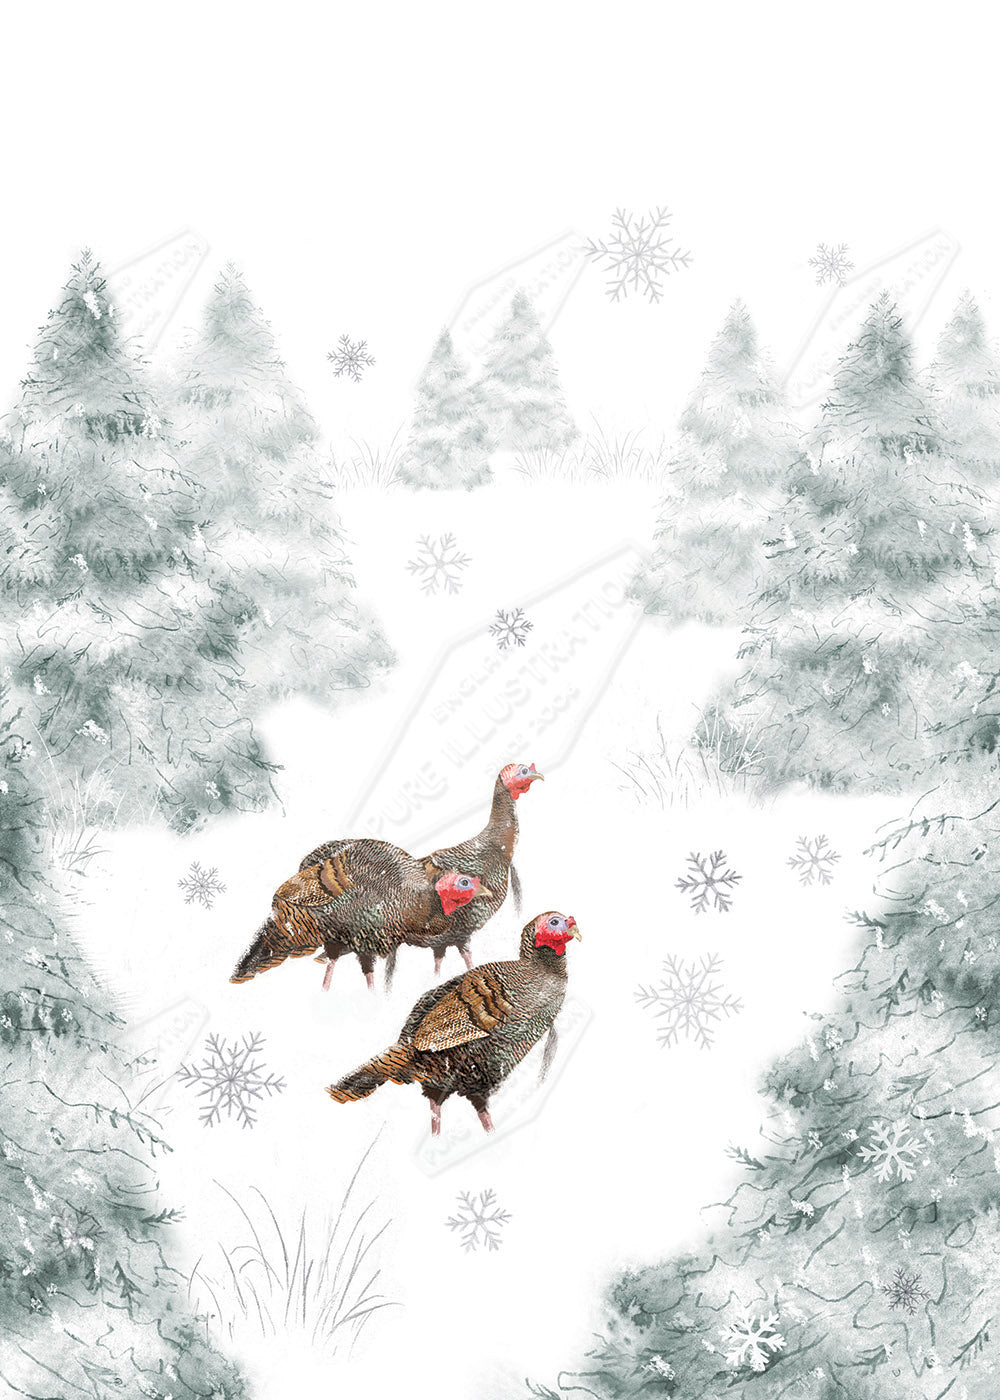 Wild Turkeys Design by Victoria Marks for Pure Art Licensing Agency & Surface Design Studio